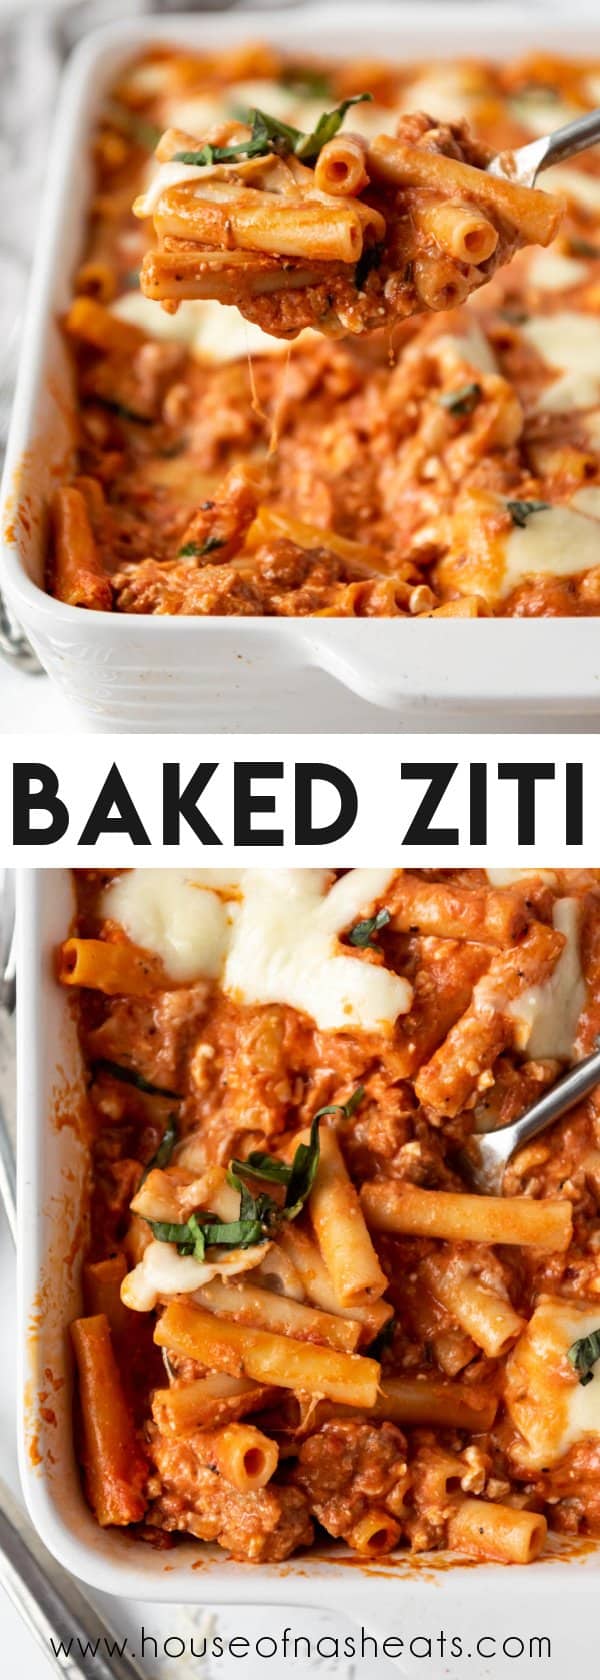 A collage of images of baked ziti with text overlay.